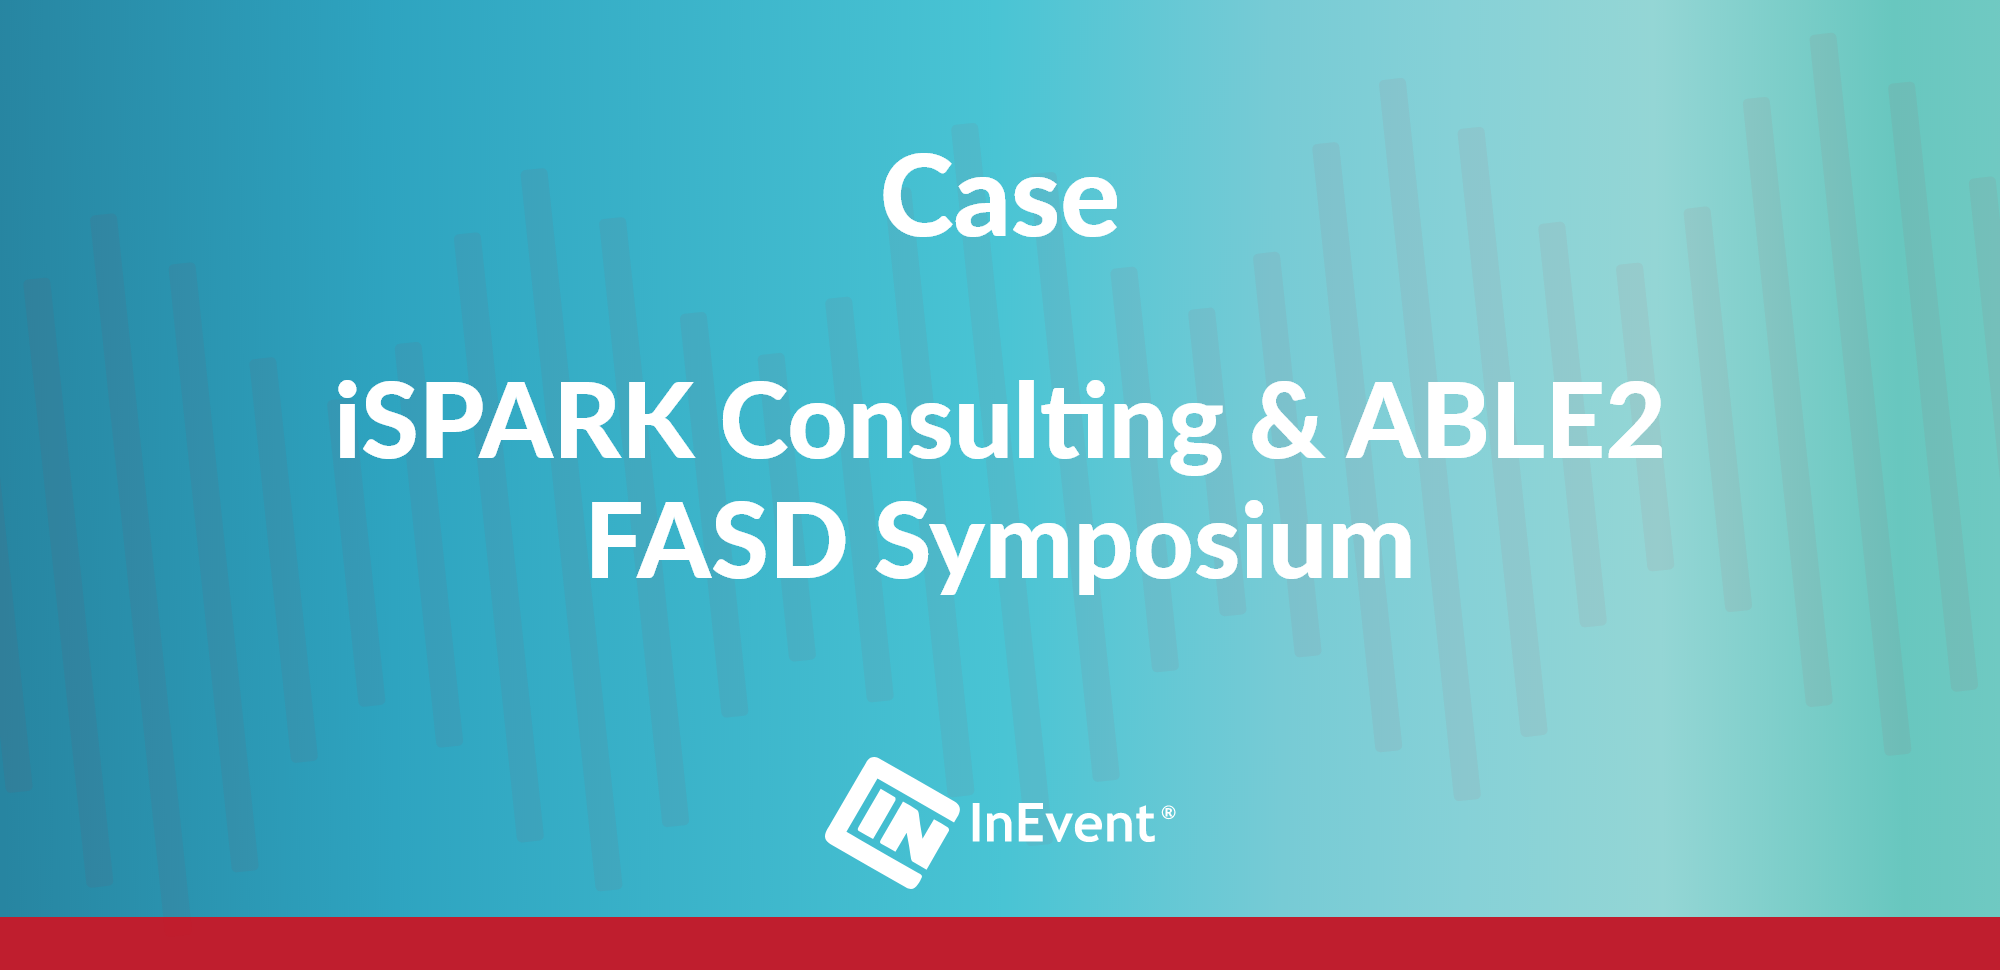 iSPARK Consulting & ABLE2 - FASD Symposium